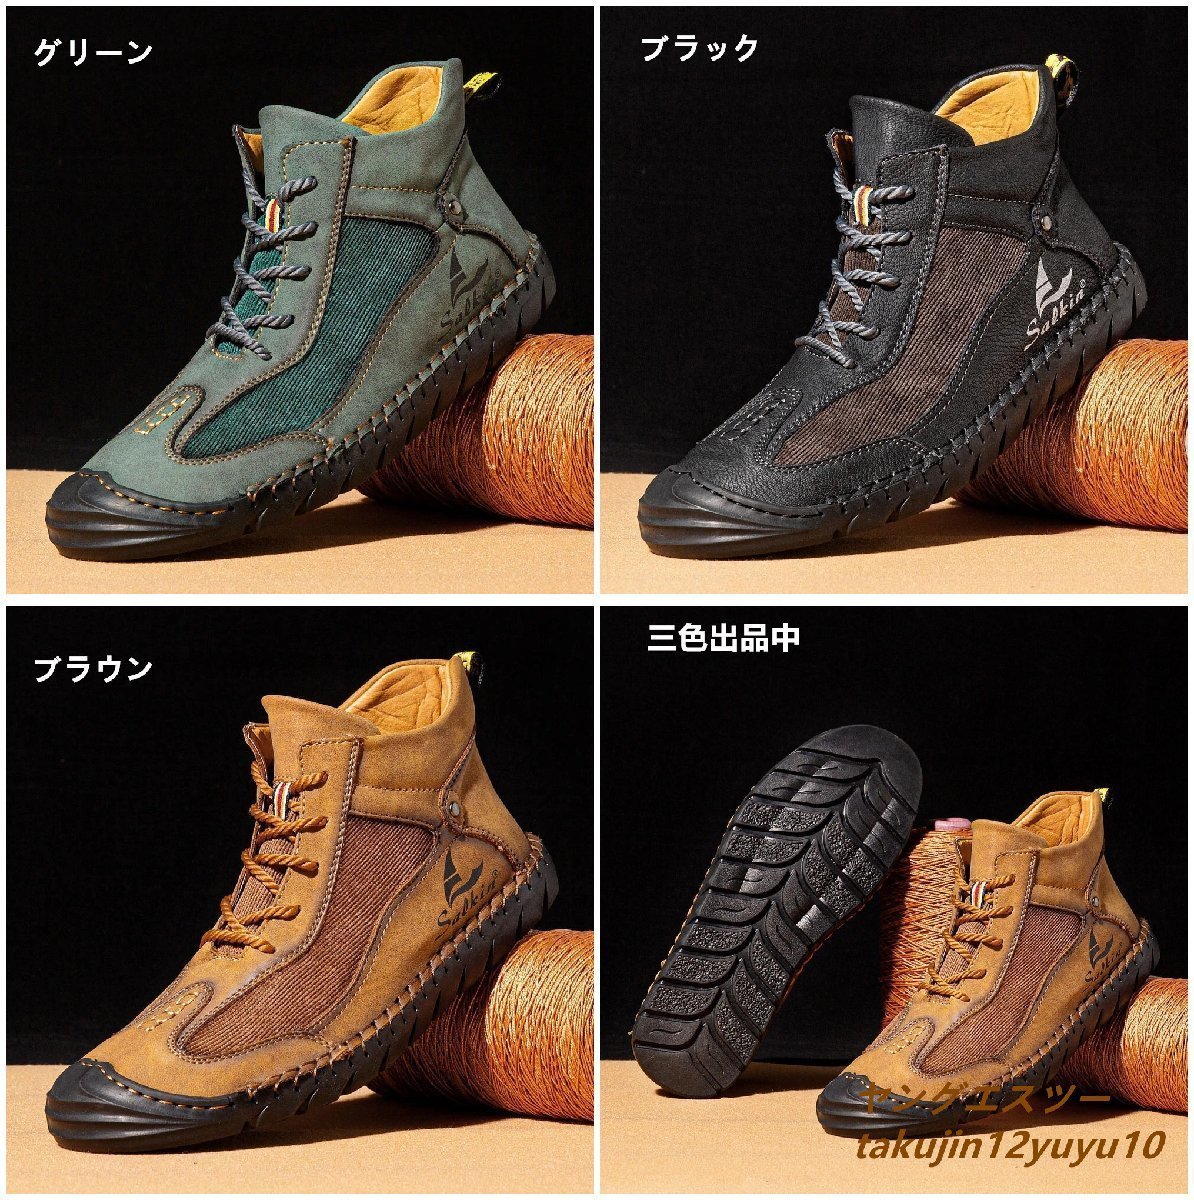  super rare * leather shoes cow leather short boots new goods sneakers walking shoes light weight outdoor camp ventilation black 28.5cm